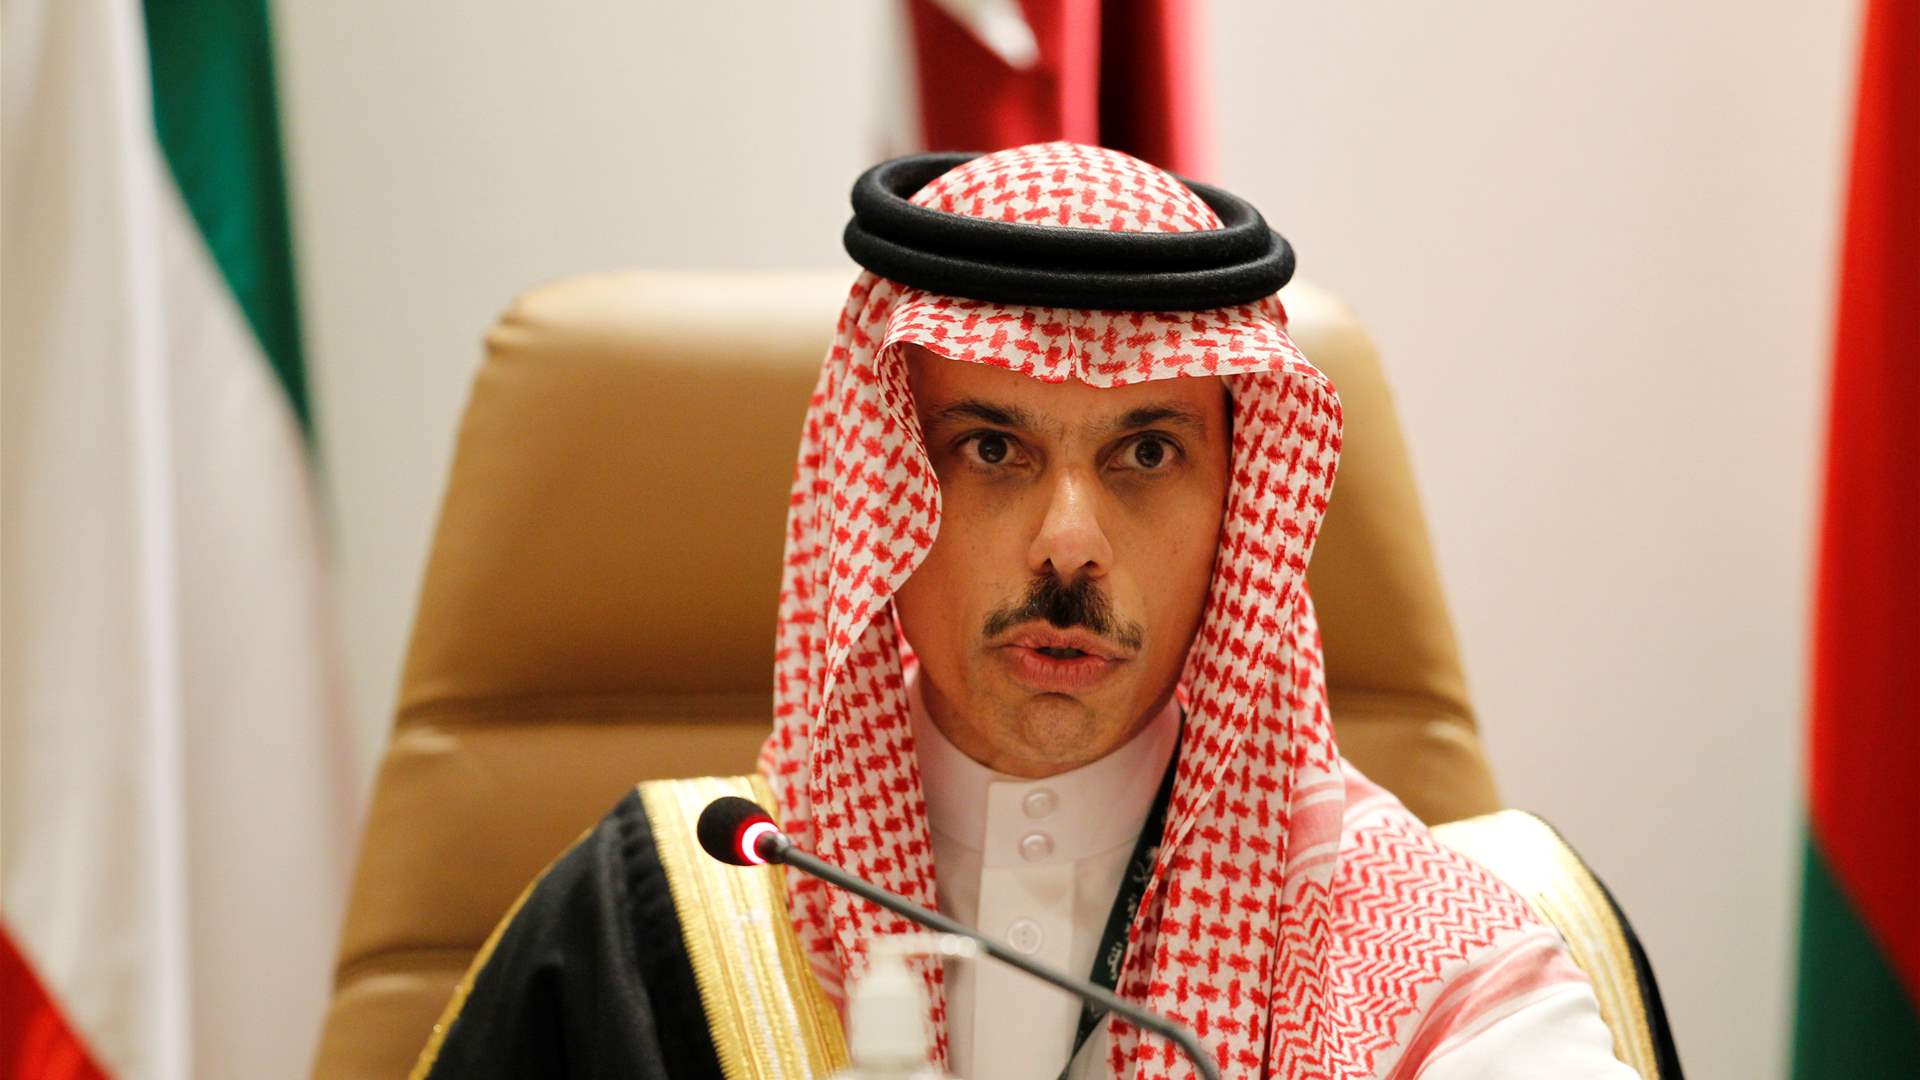 Saudi FM: The Kingdom may recognize Israel if the Palestinian crisis is resolved